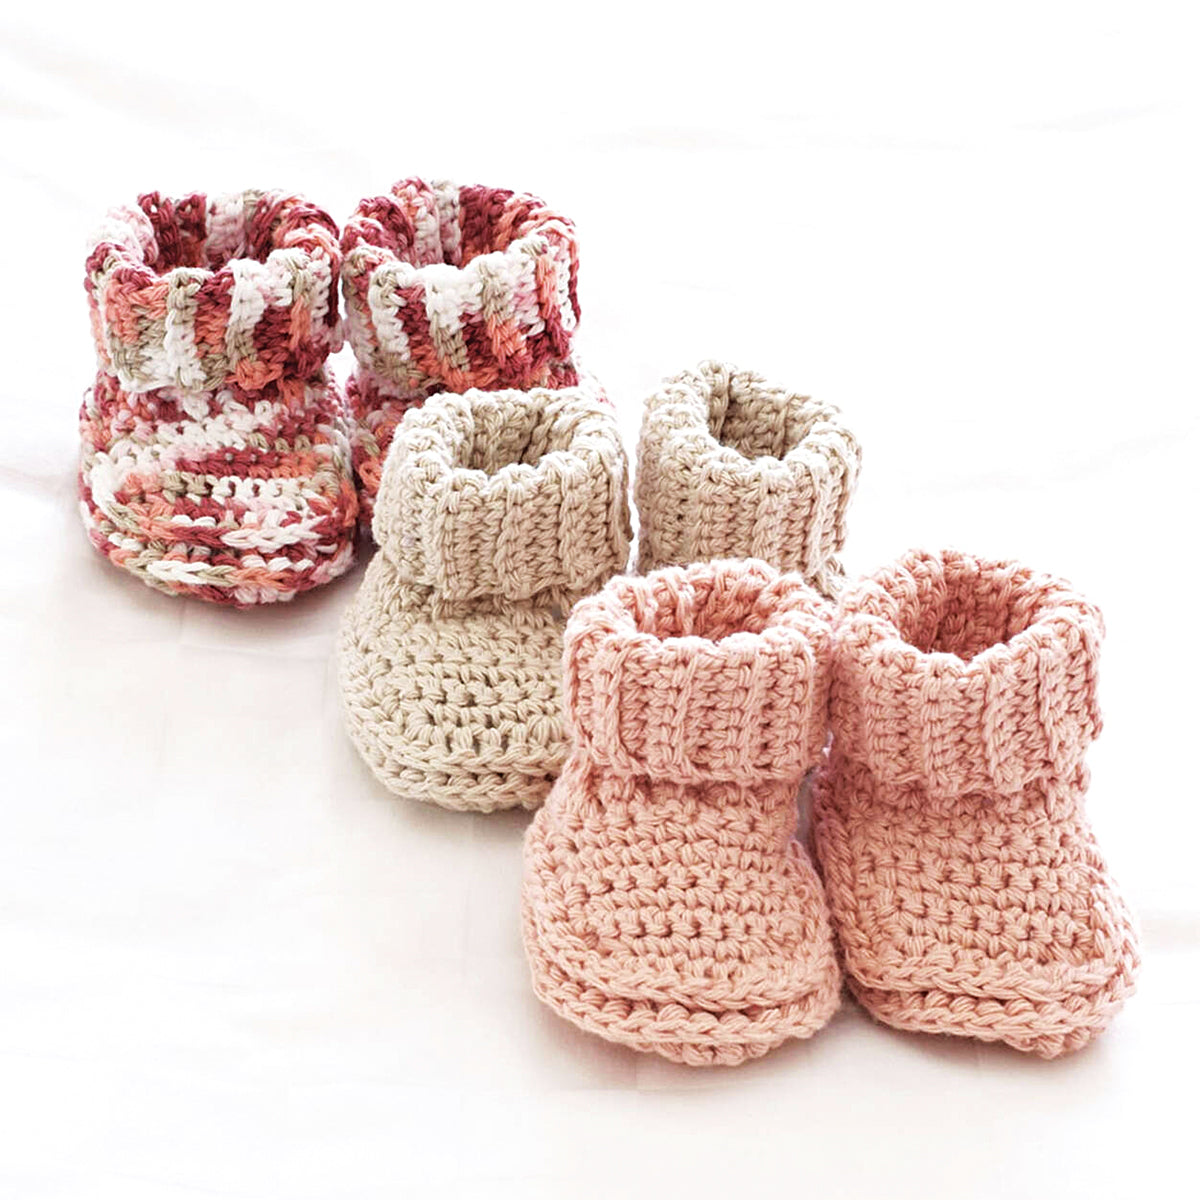 Crochet Pattern Baby Sneakers By Crazy Patterns | Crochet baby shoes free  pattern, Crochet baby shoes pattern, Crochet baby booties free pattern